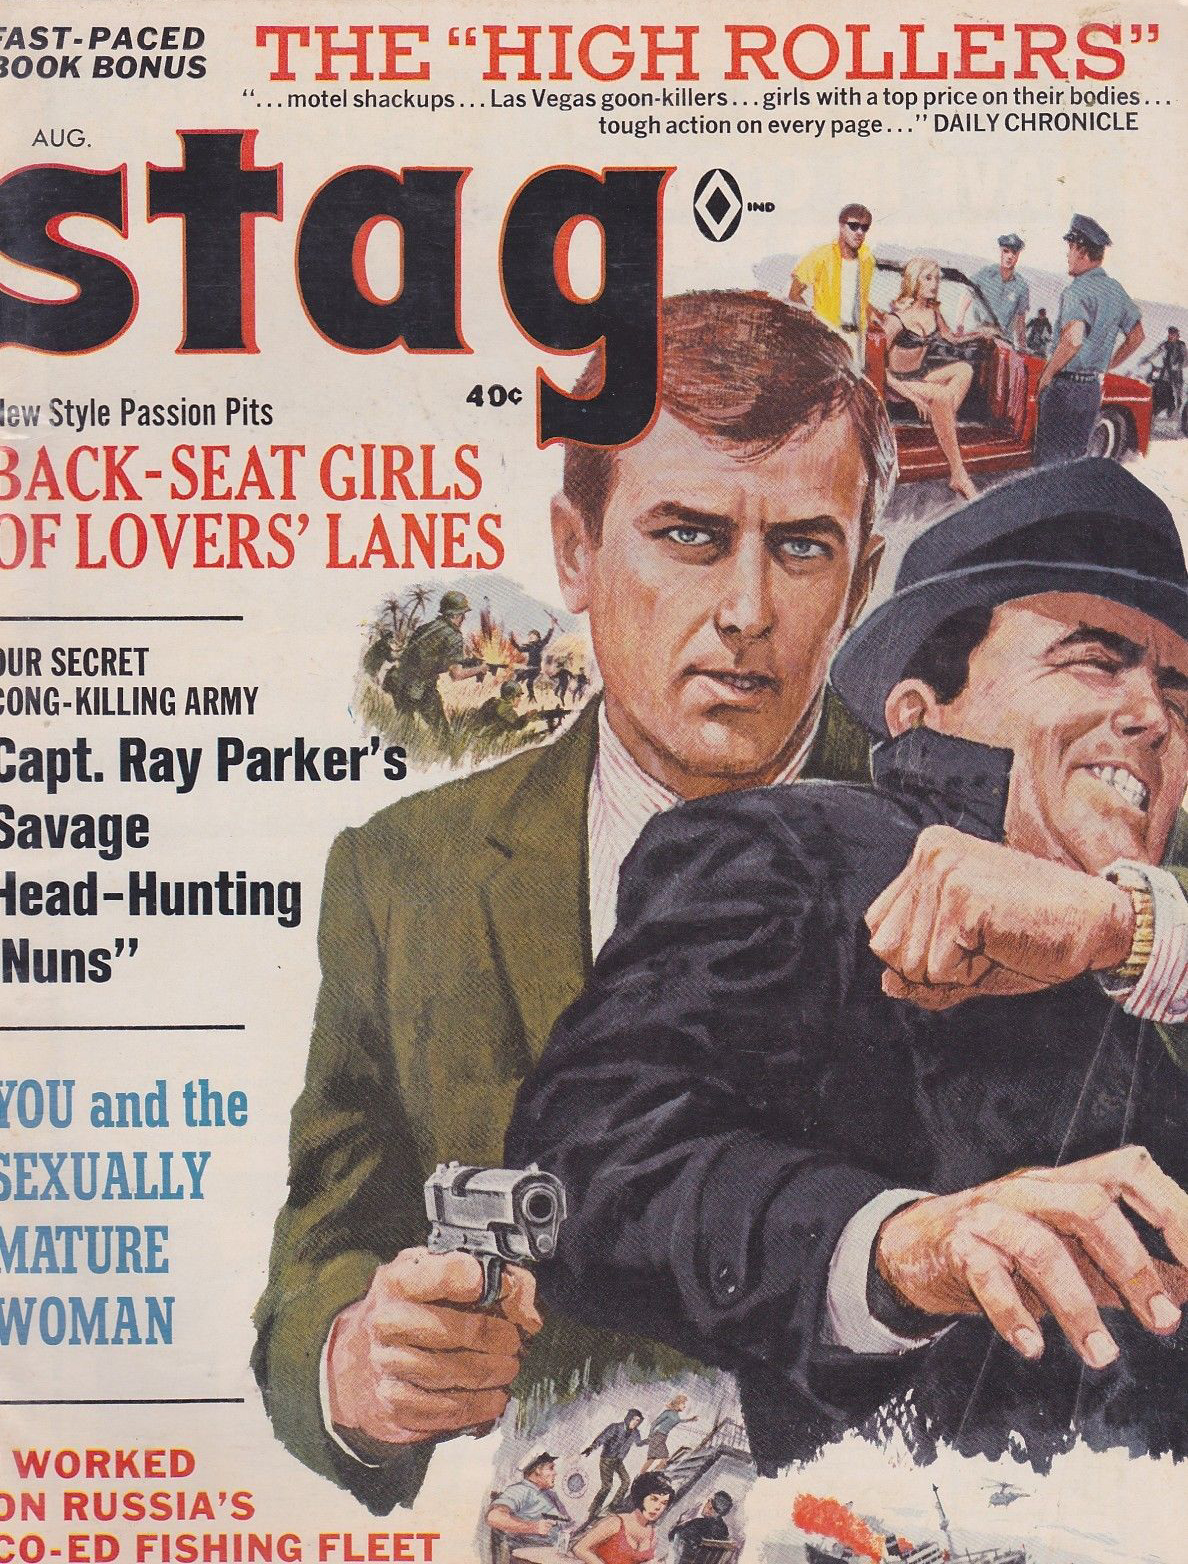 Stag August 1967 magazine back issue Stag magizine back copy Stag August 1967 Magazine for Men Adult Back Issue Published by Leeds Publishing Corp. Fast - Paced Book Bonus.